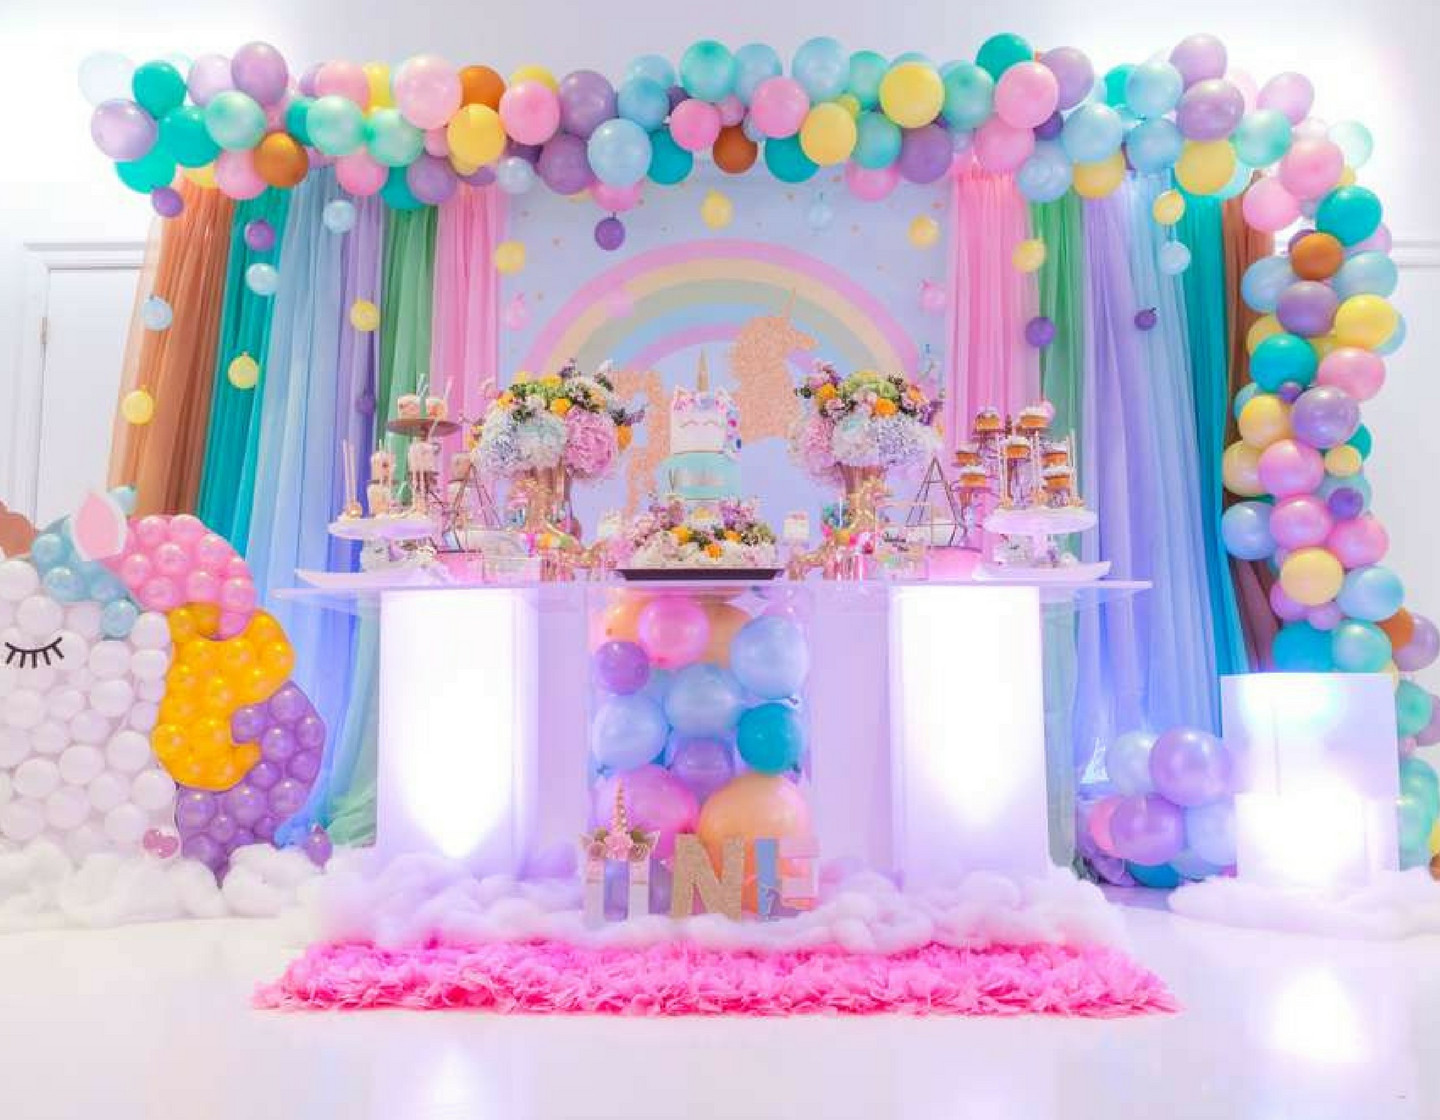 Baby Birthday Party Venues
 Planning a kids birthday party some of the newest and